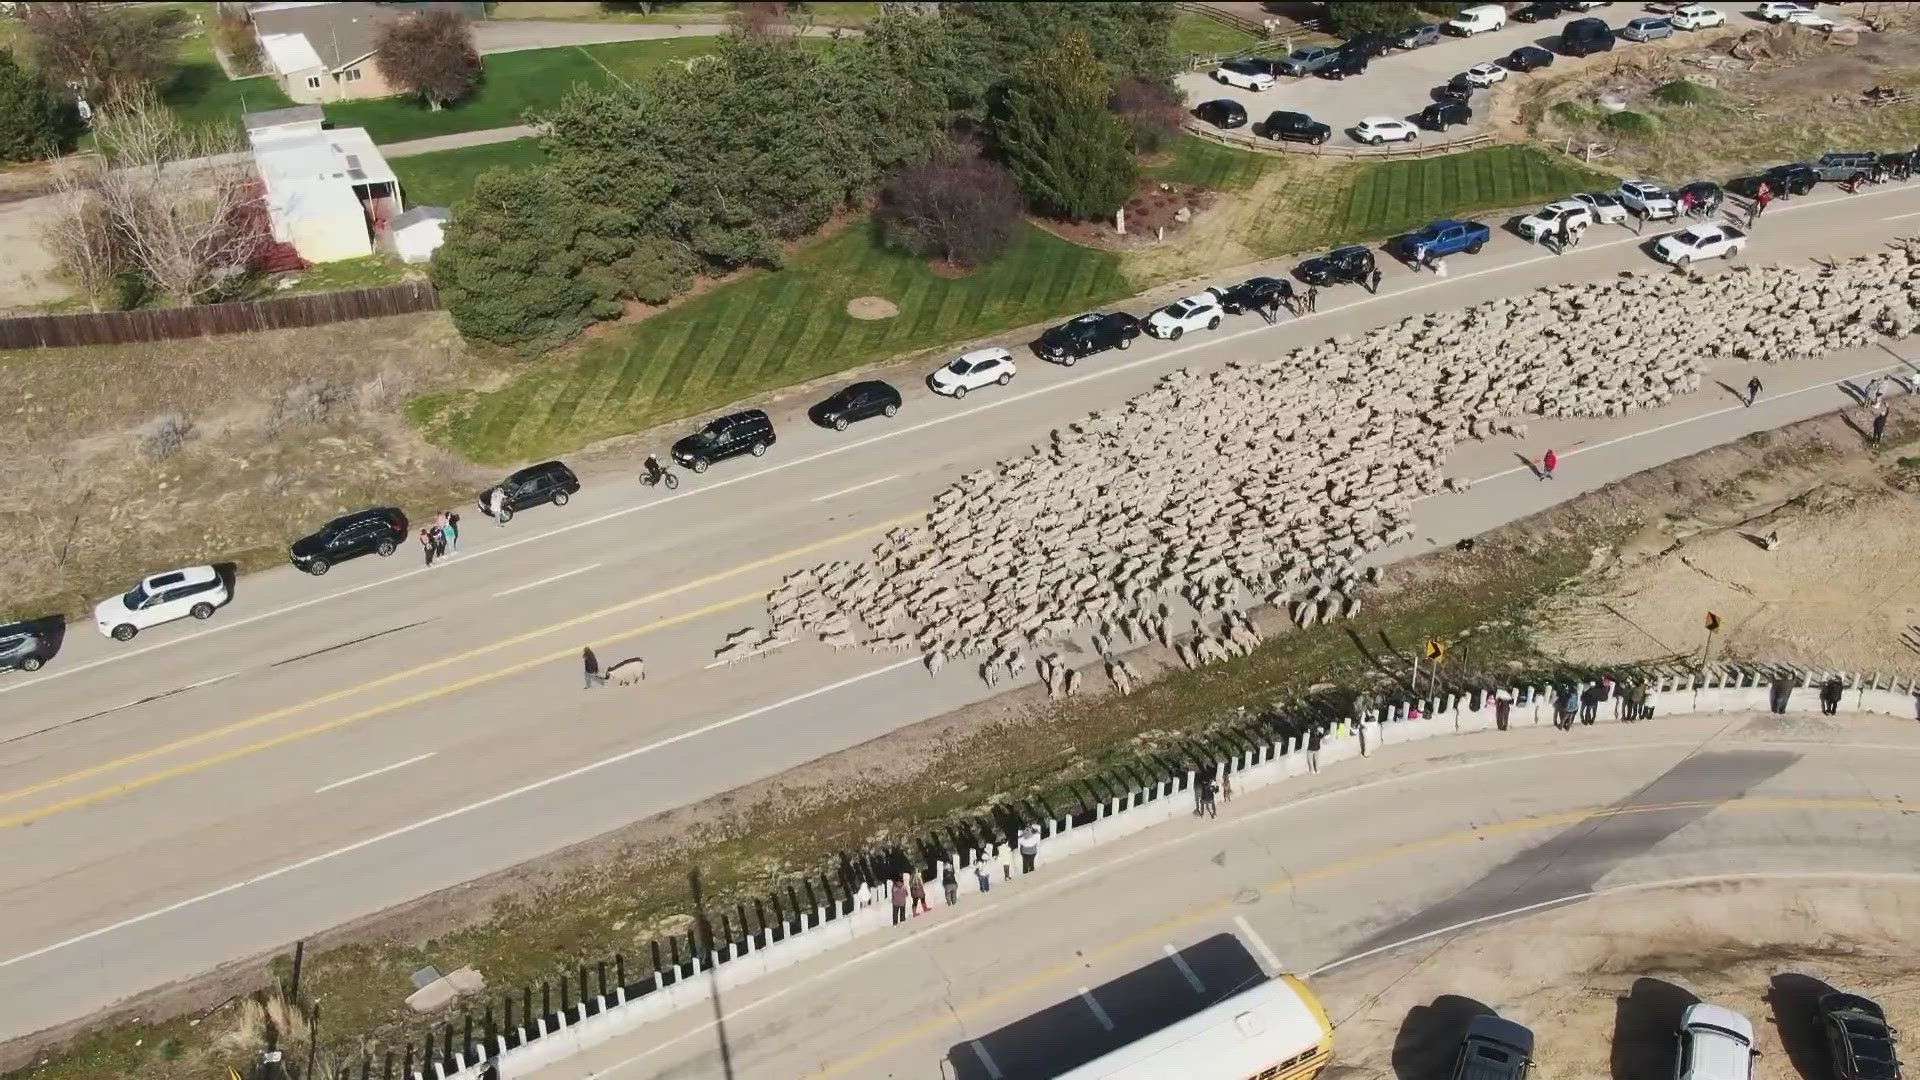 A seasonal staple in Idaho is the annual sheep crossing where they shut down highways to 'get to the other side' - a tradition sheepherders have held for 100 years.